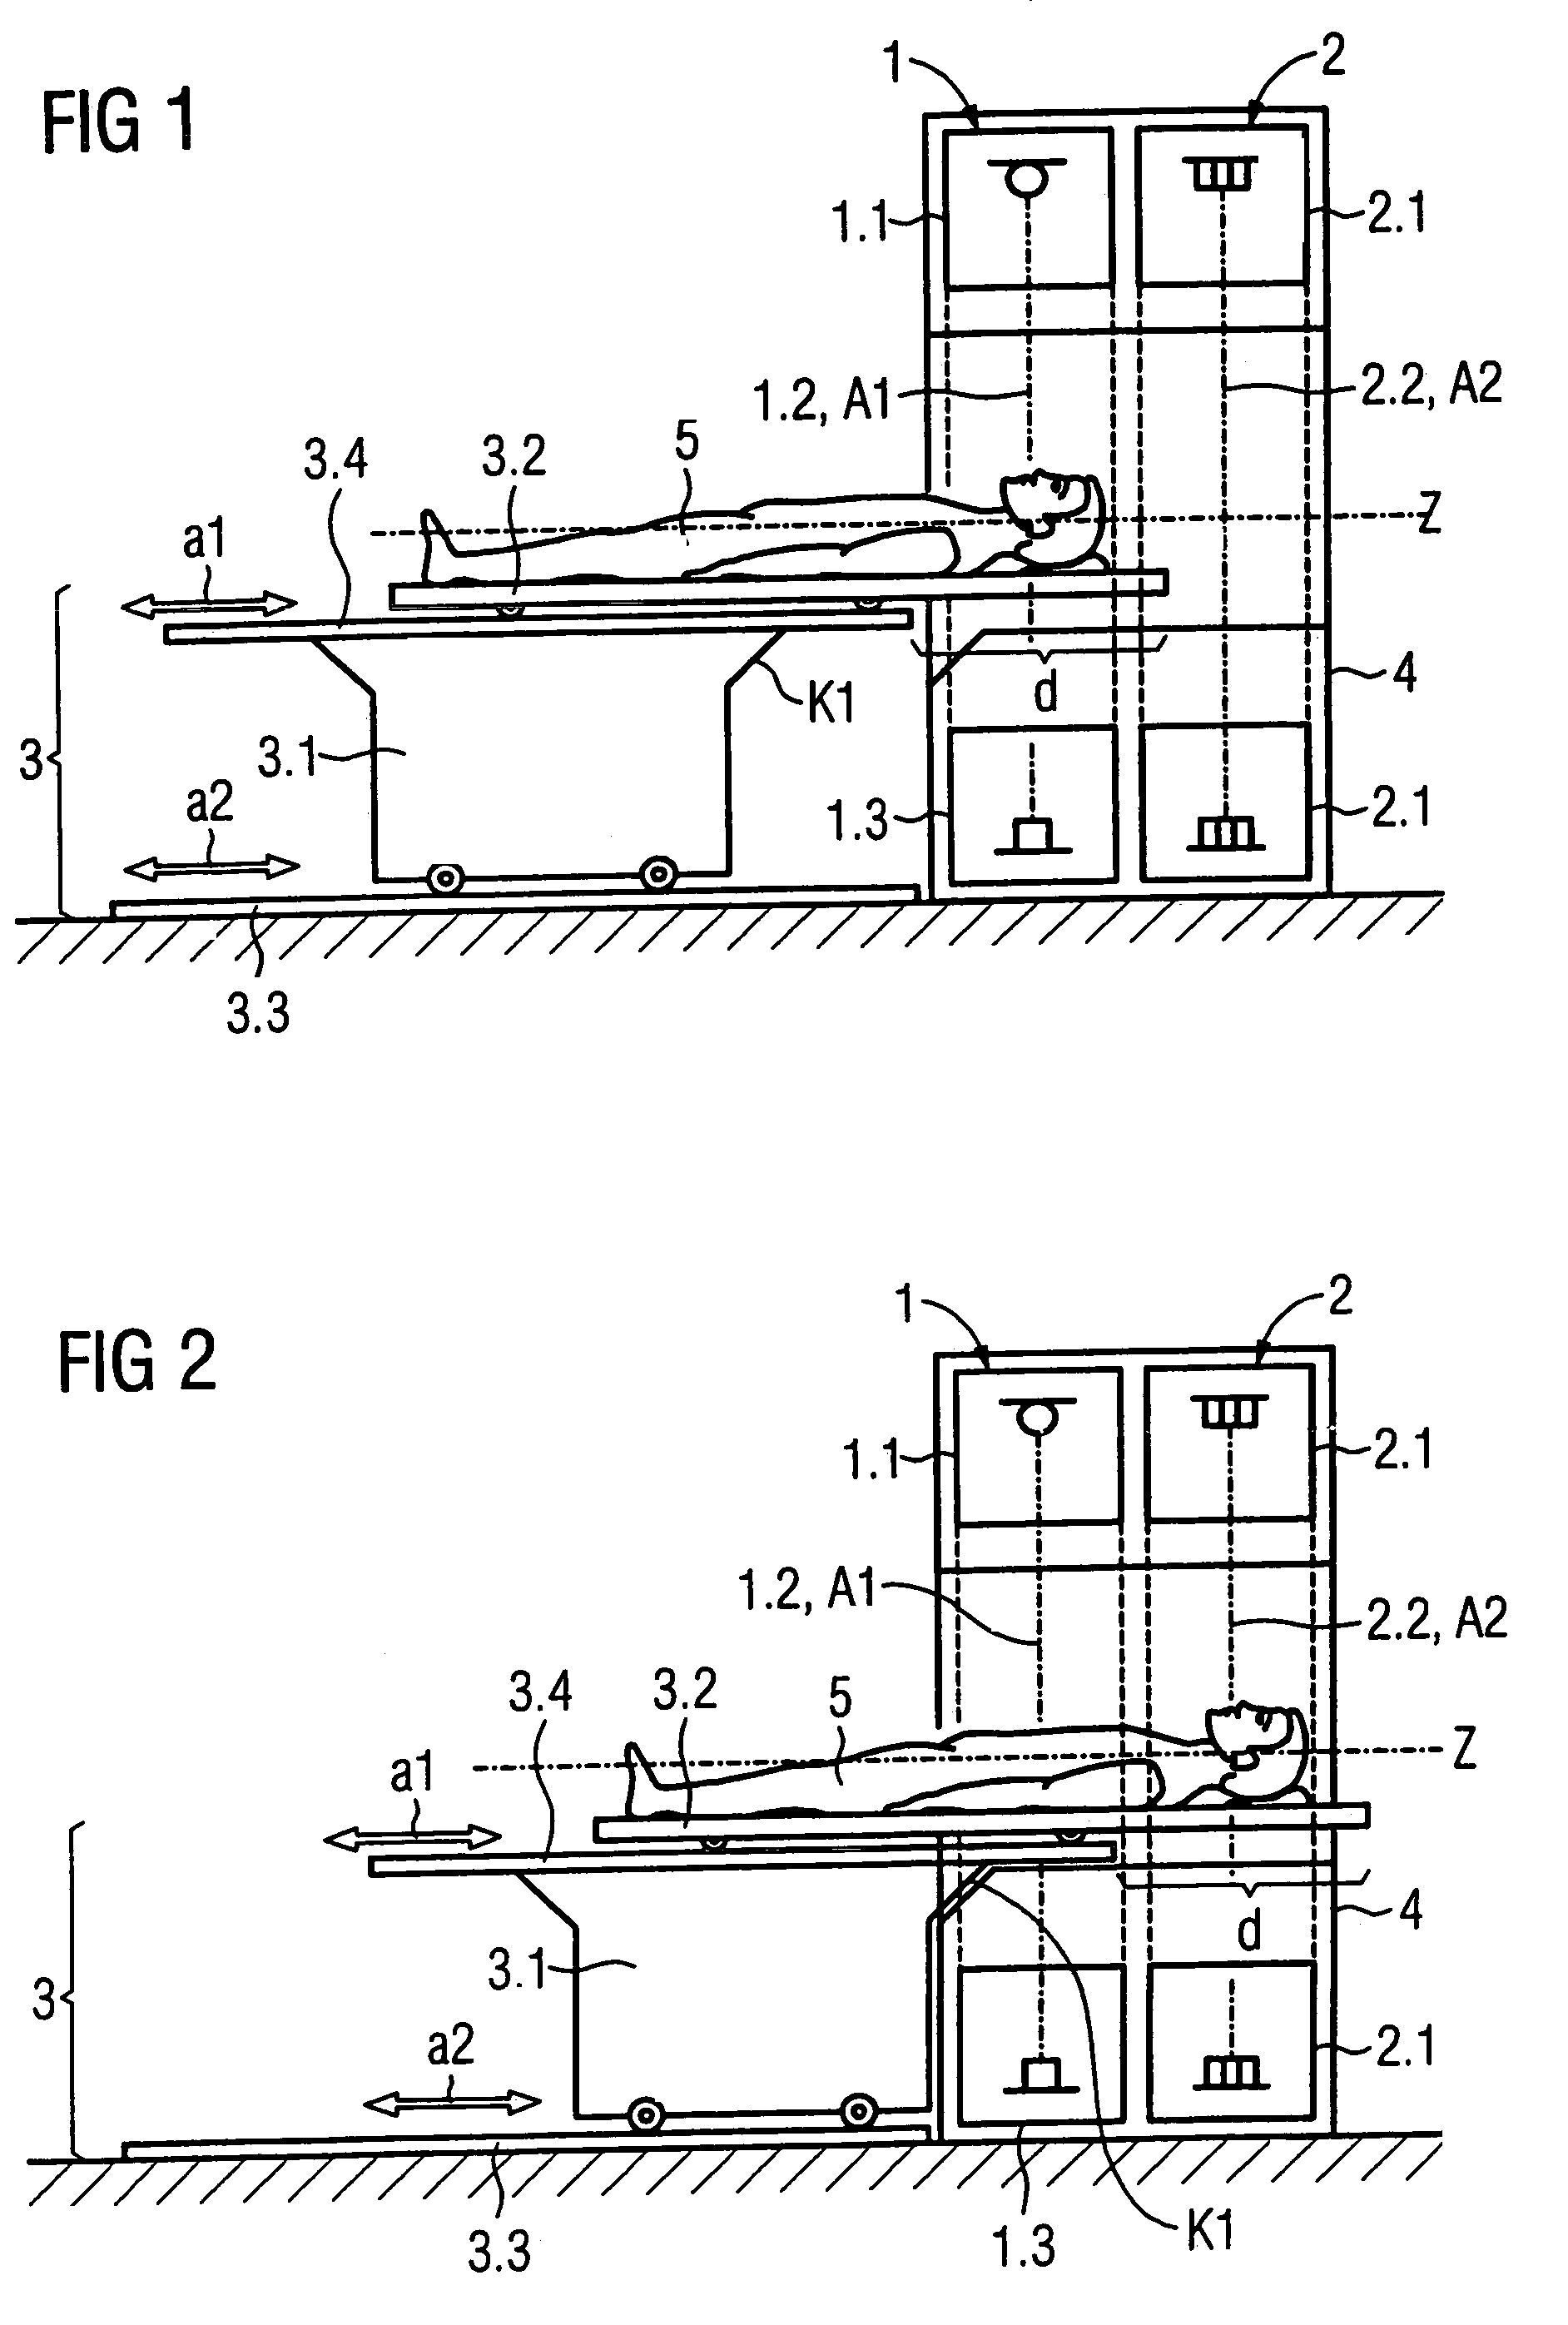 Dual modality tomography apparatus with a patient support device